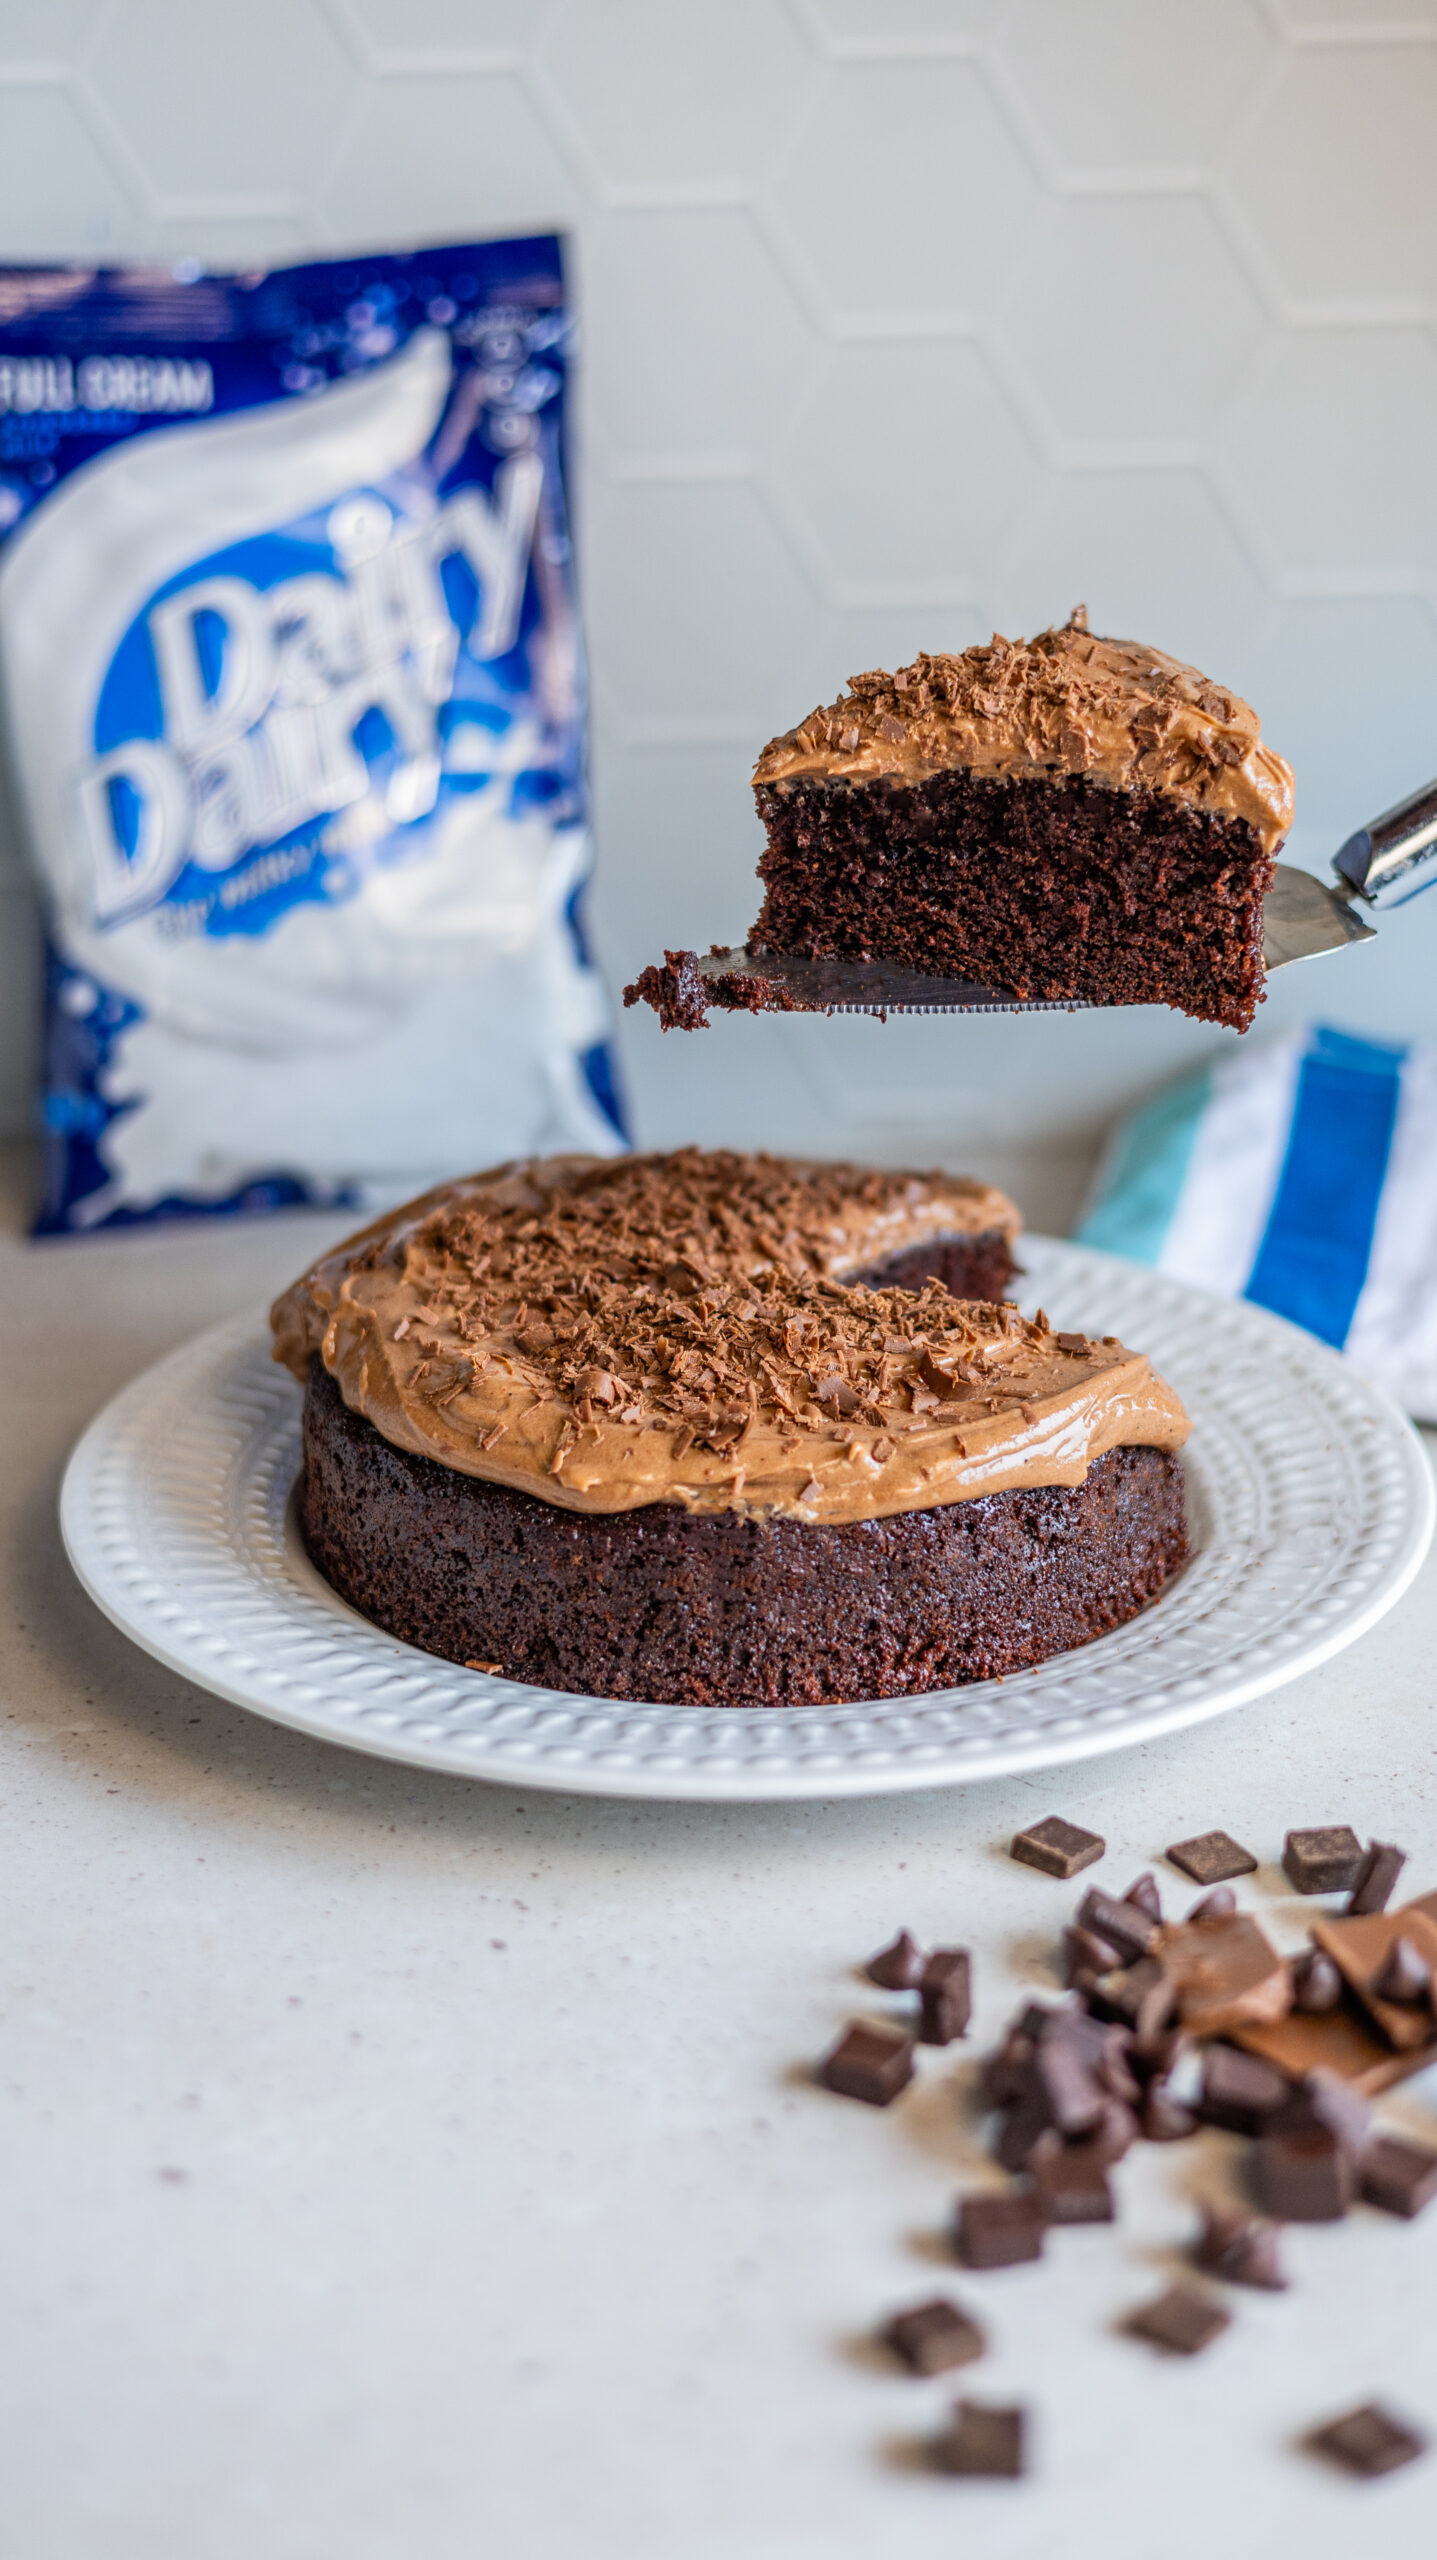 8-inch round chocolate cake with chocolate buttercream icing on top, sprinkled with milk chocolate shavings. A slice has been cut from the cake and is being held aloft just above the cake itself on a spatula. A pack of Dairy Dairy Full Cream Milk is in the background to the left. Presented as a Father's Day treat.